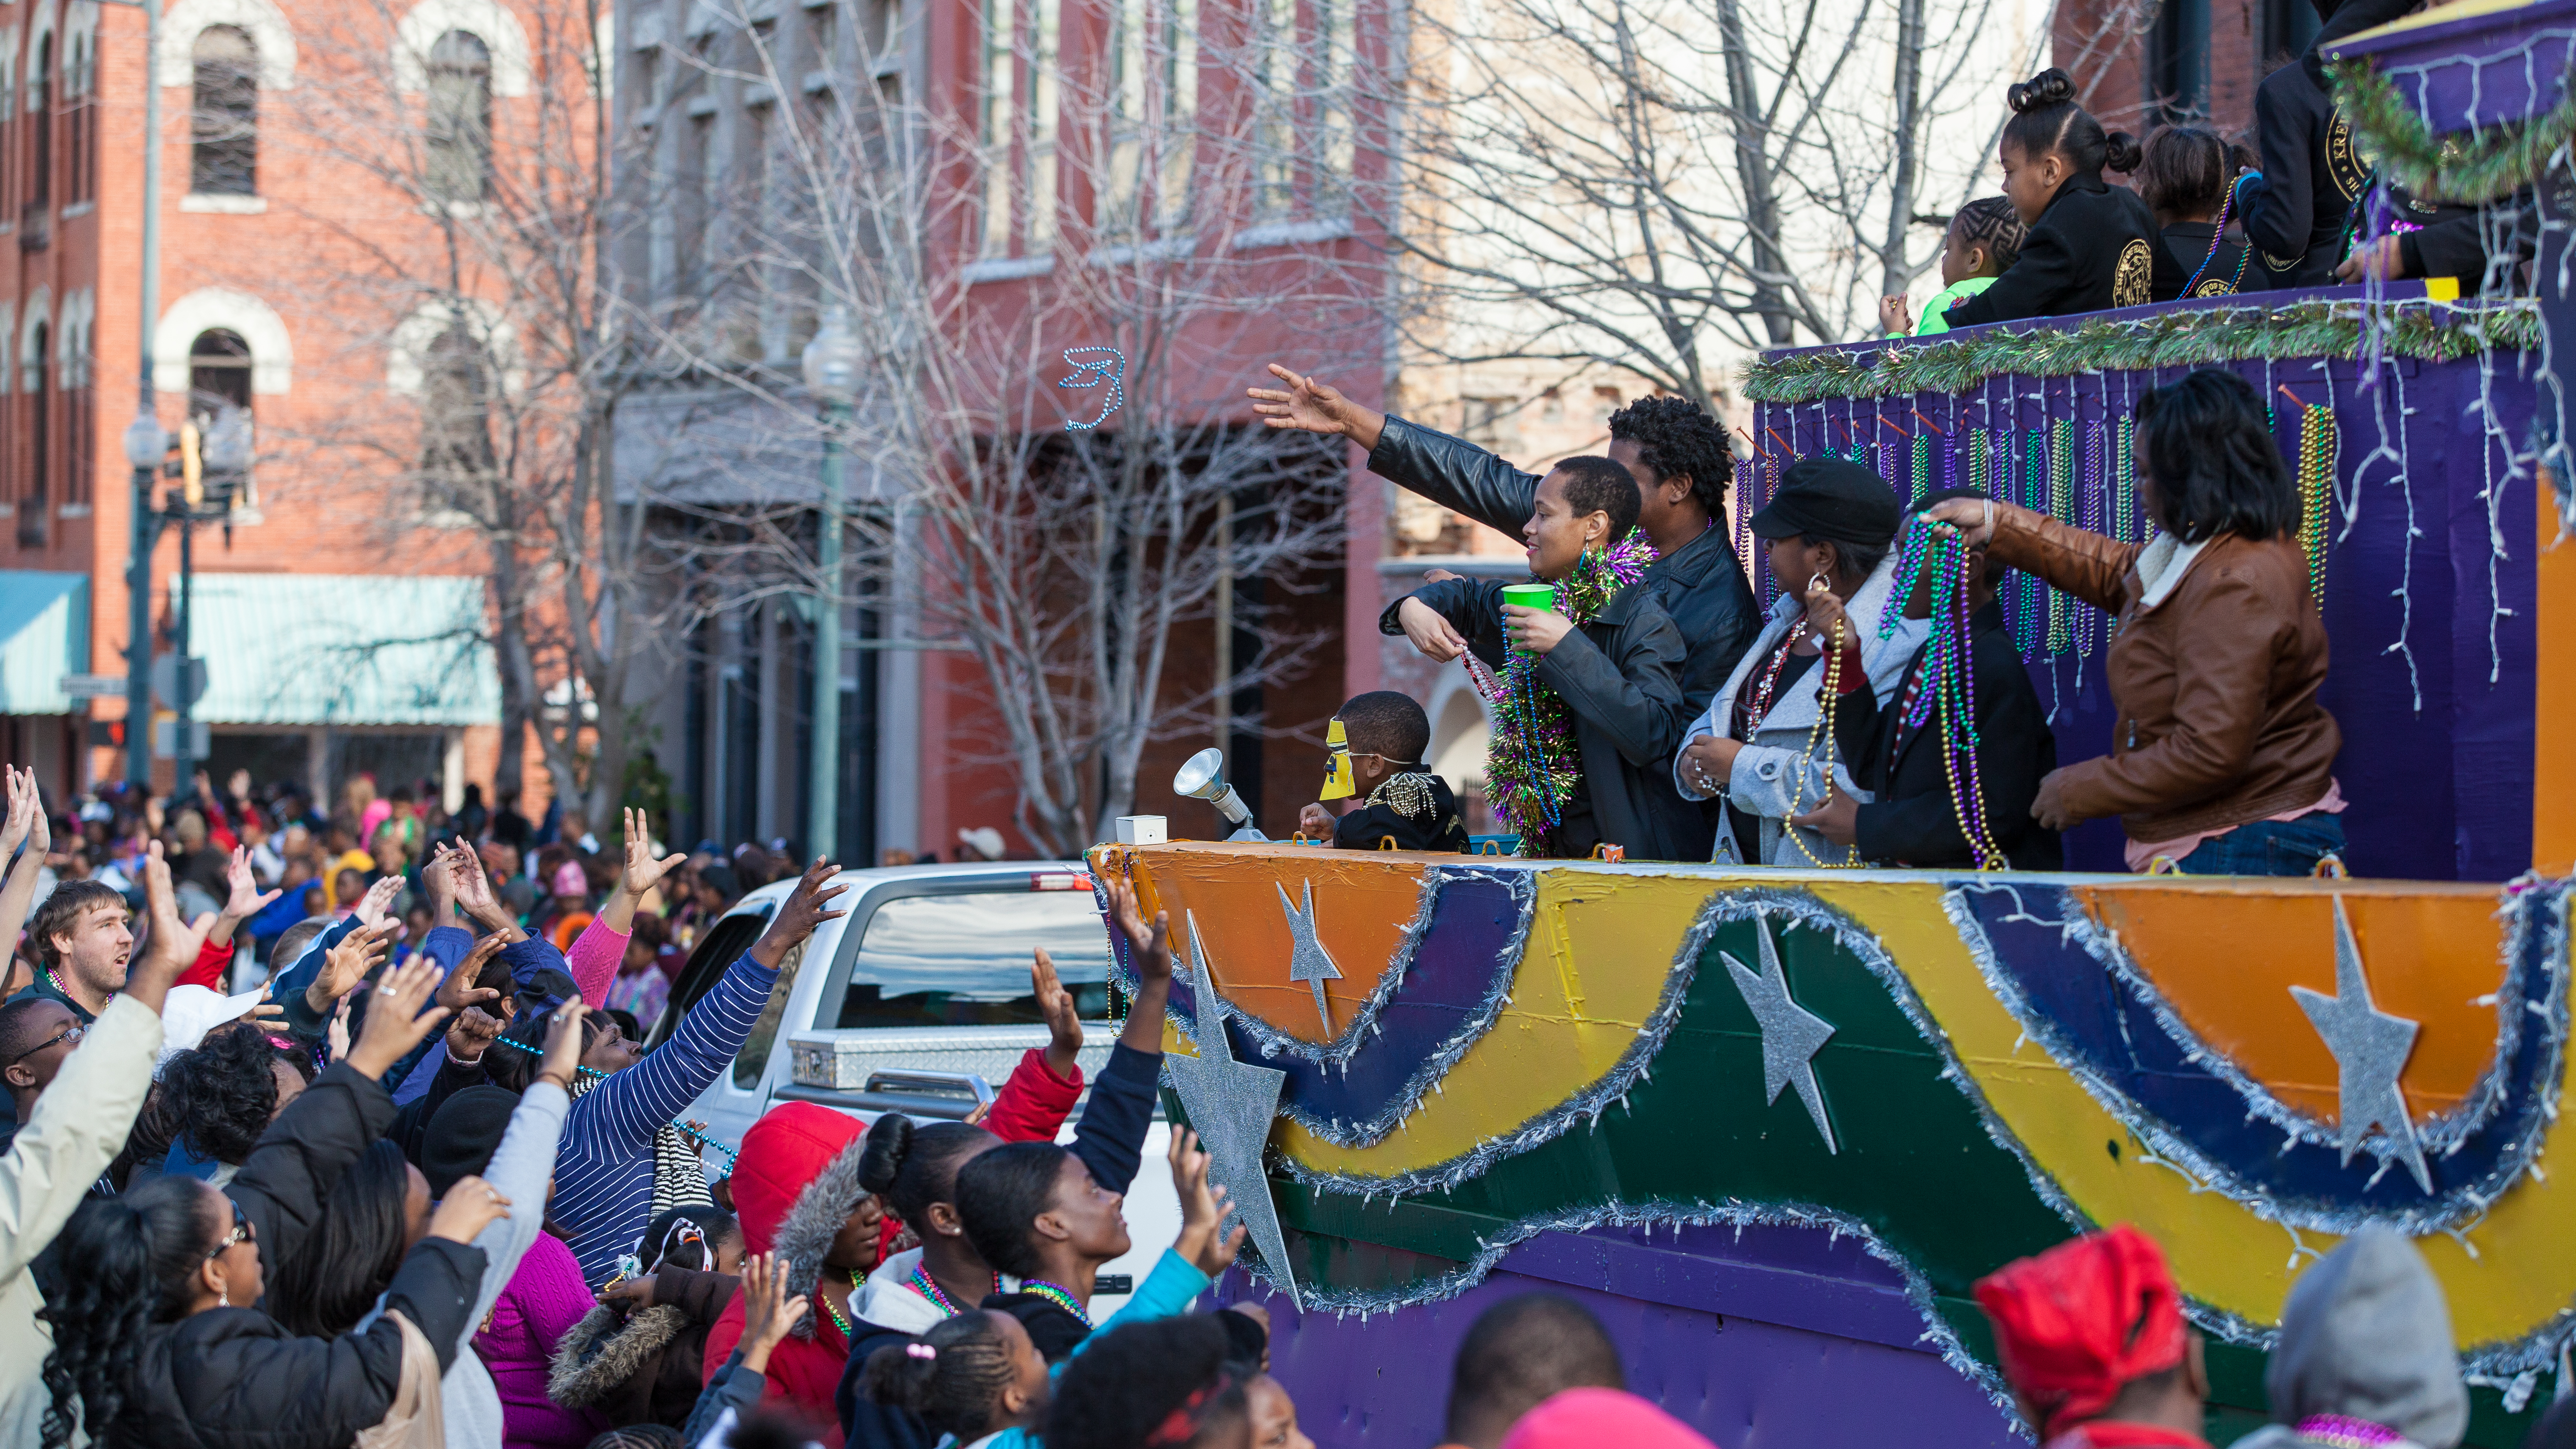 New Orleans keeps Mardi Gras beads out of storm drains with new initiatives